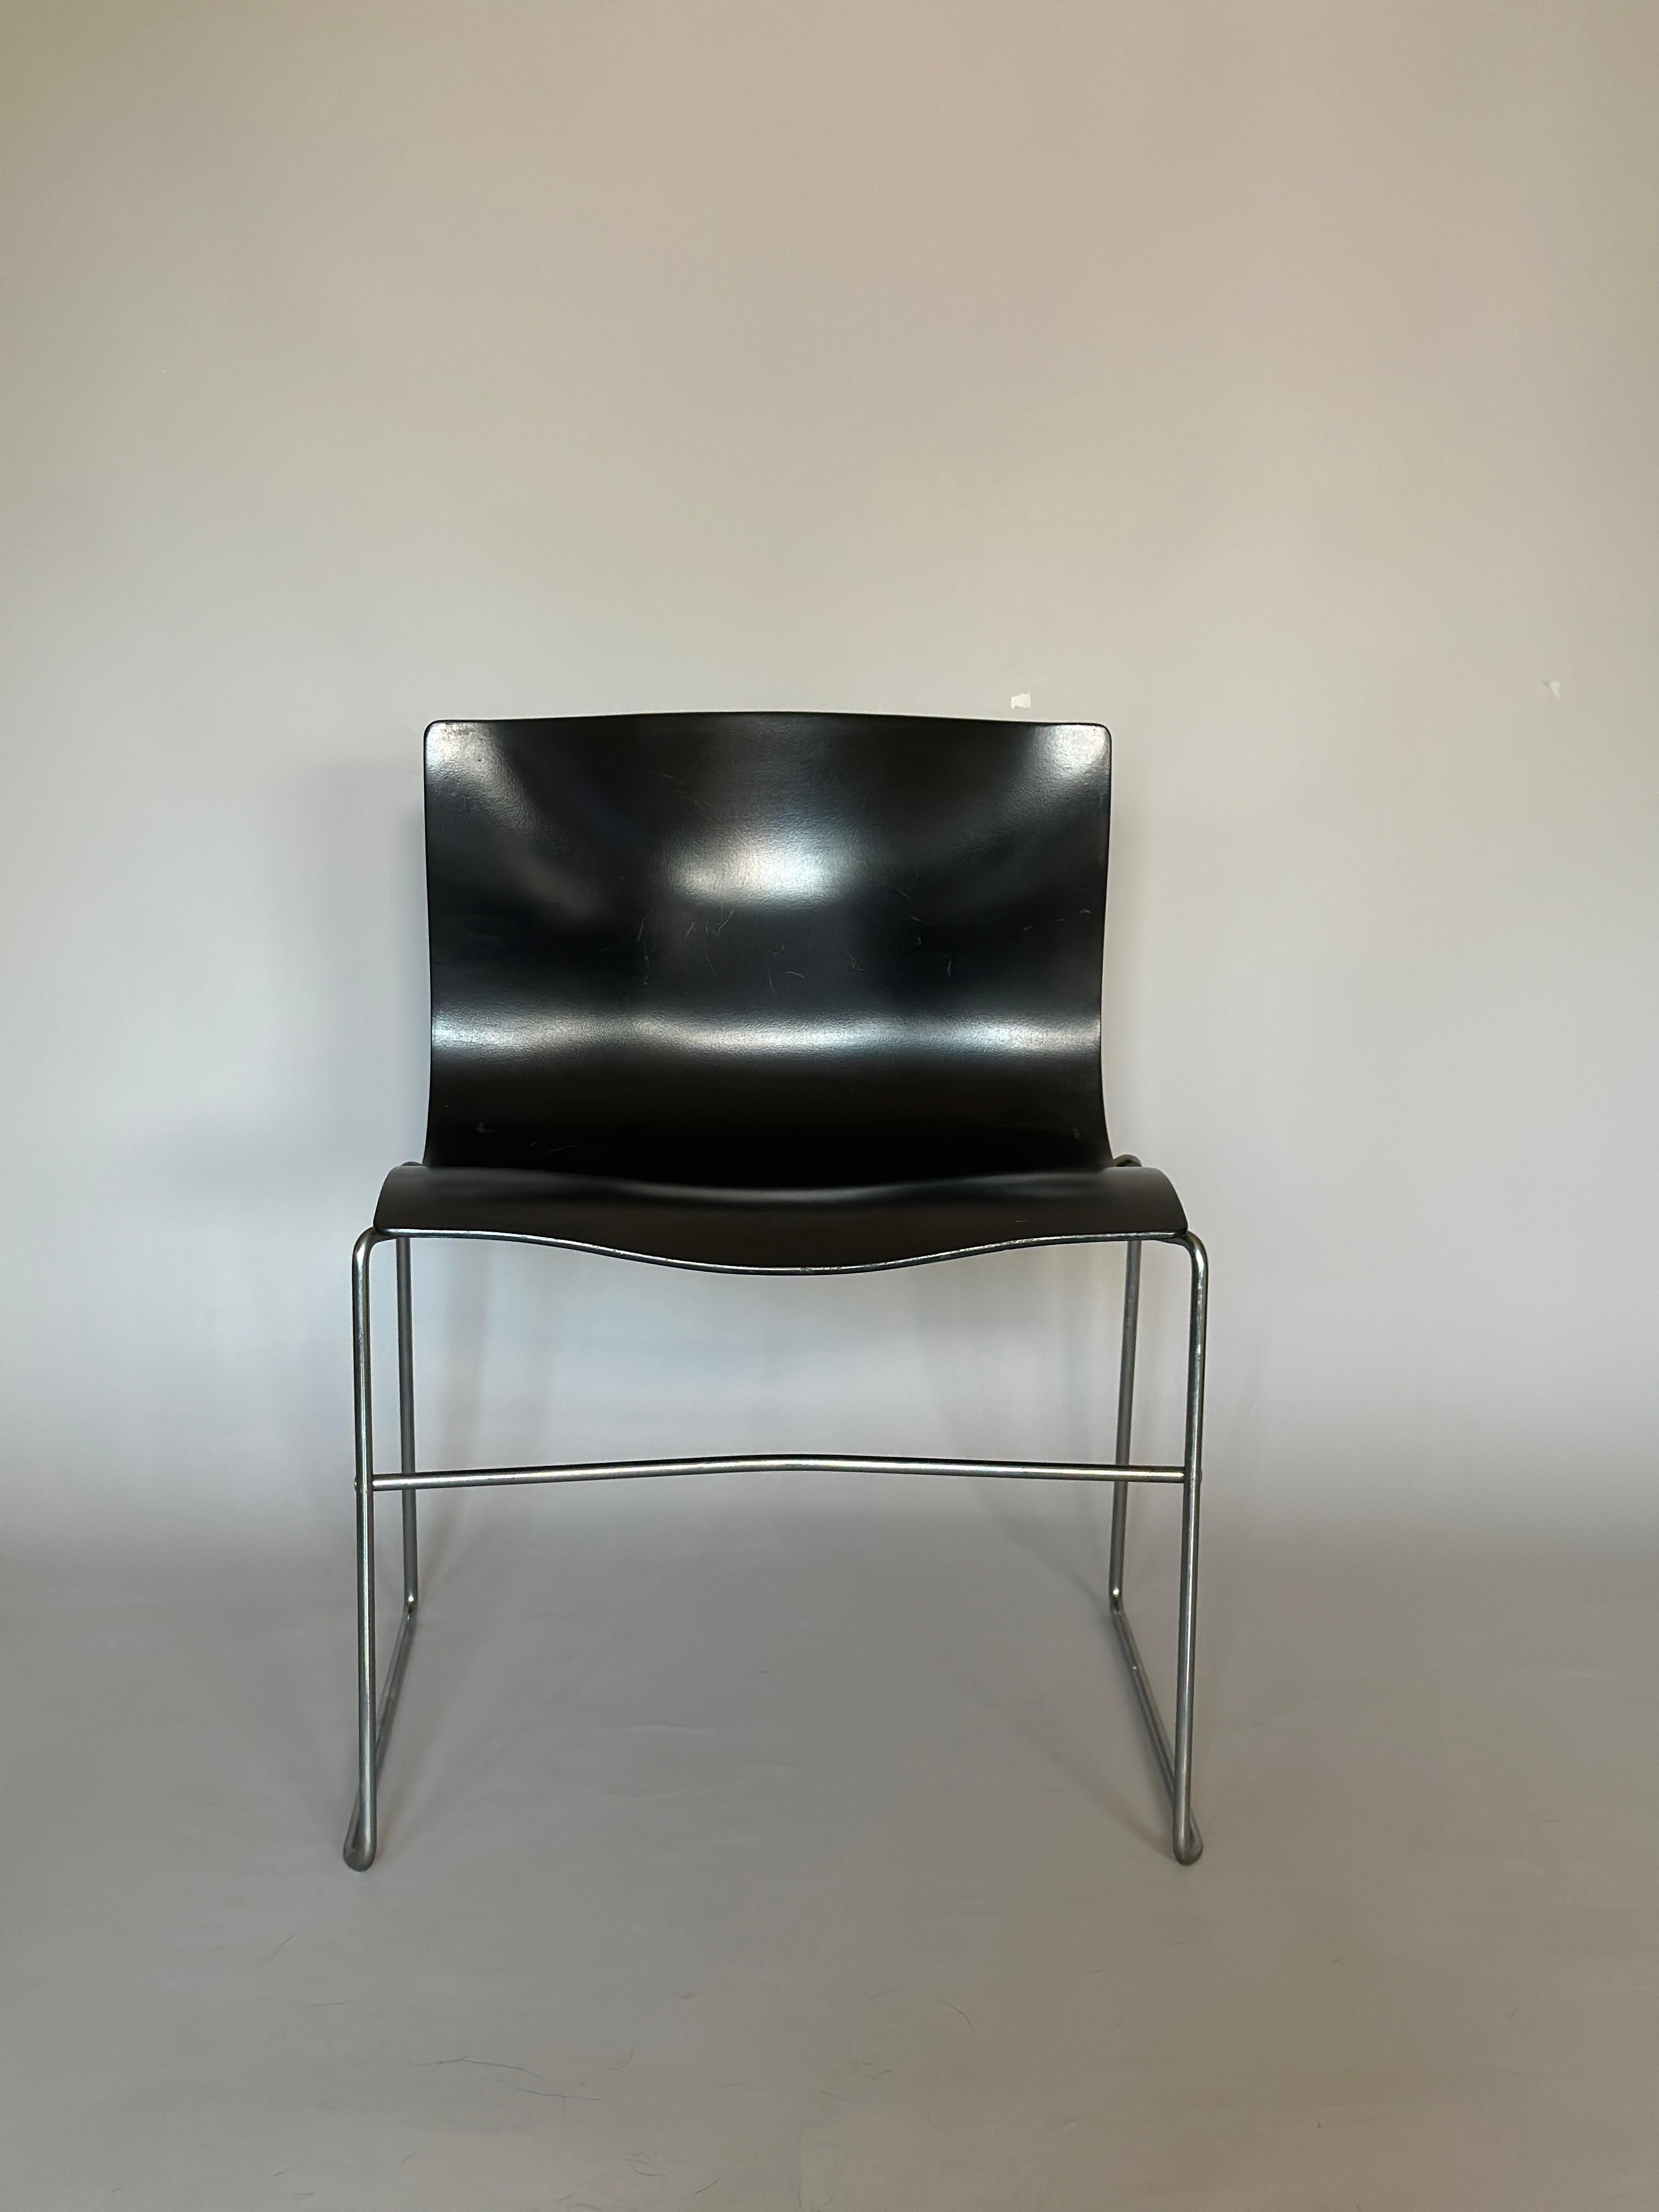 Knoll chairs by Massimo Vagnelli 1985 For Sale 2